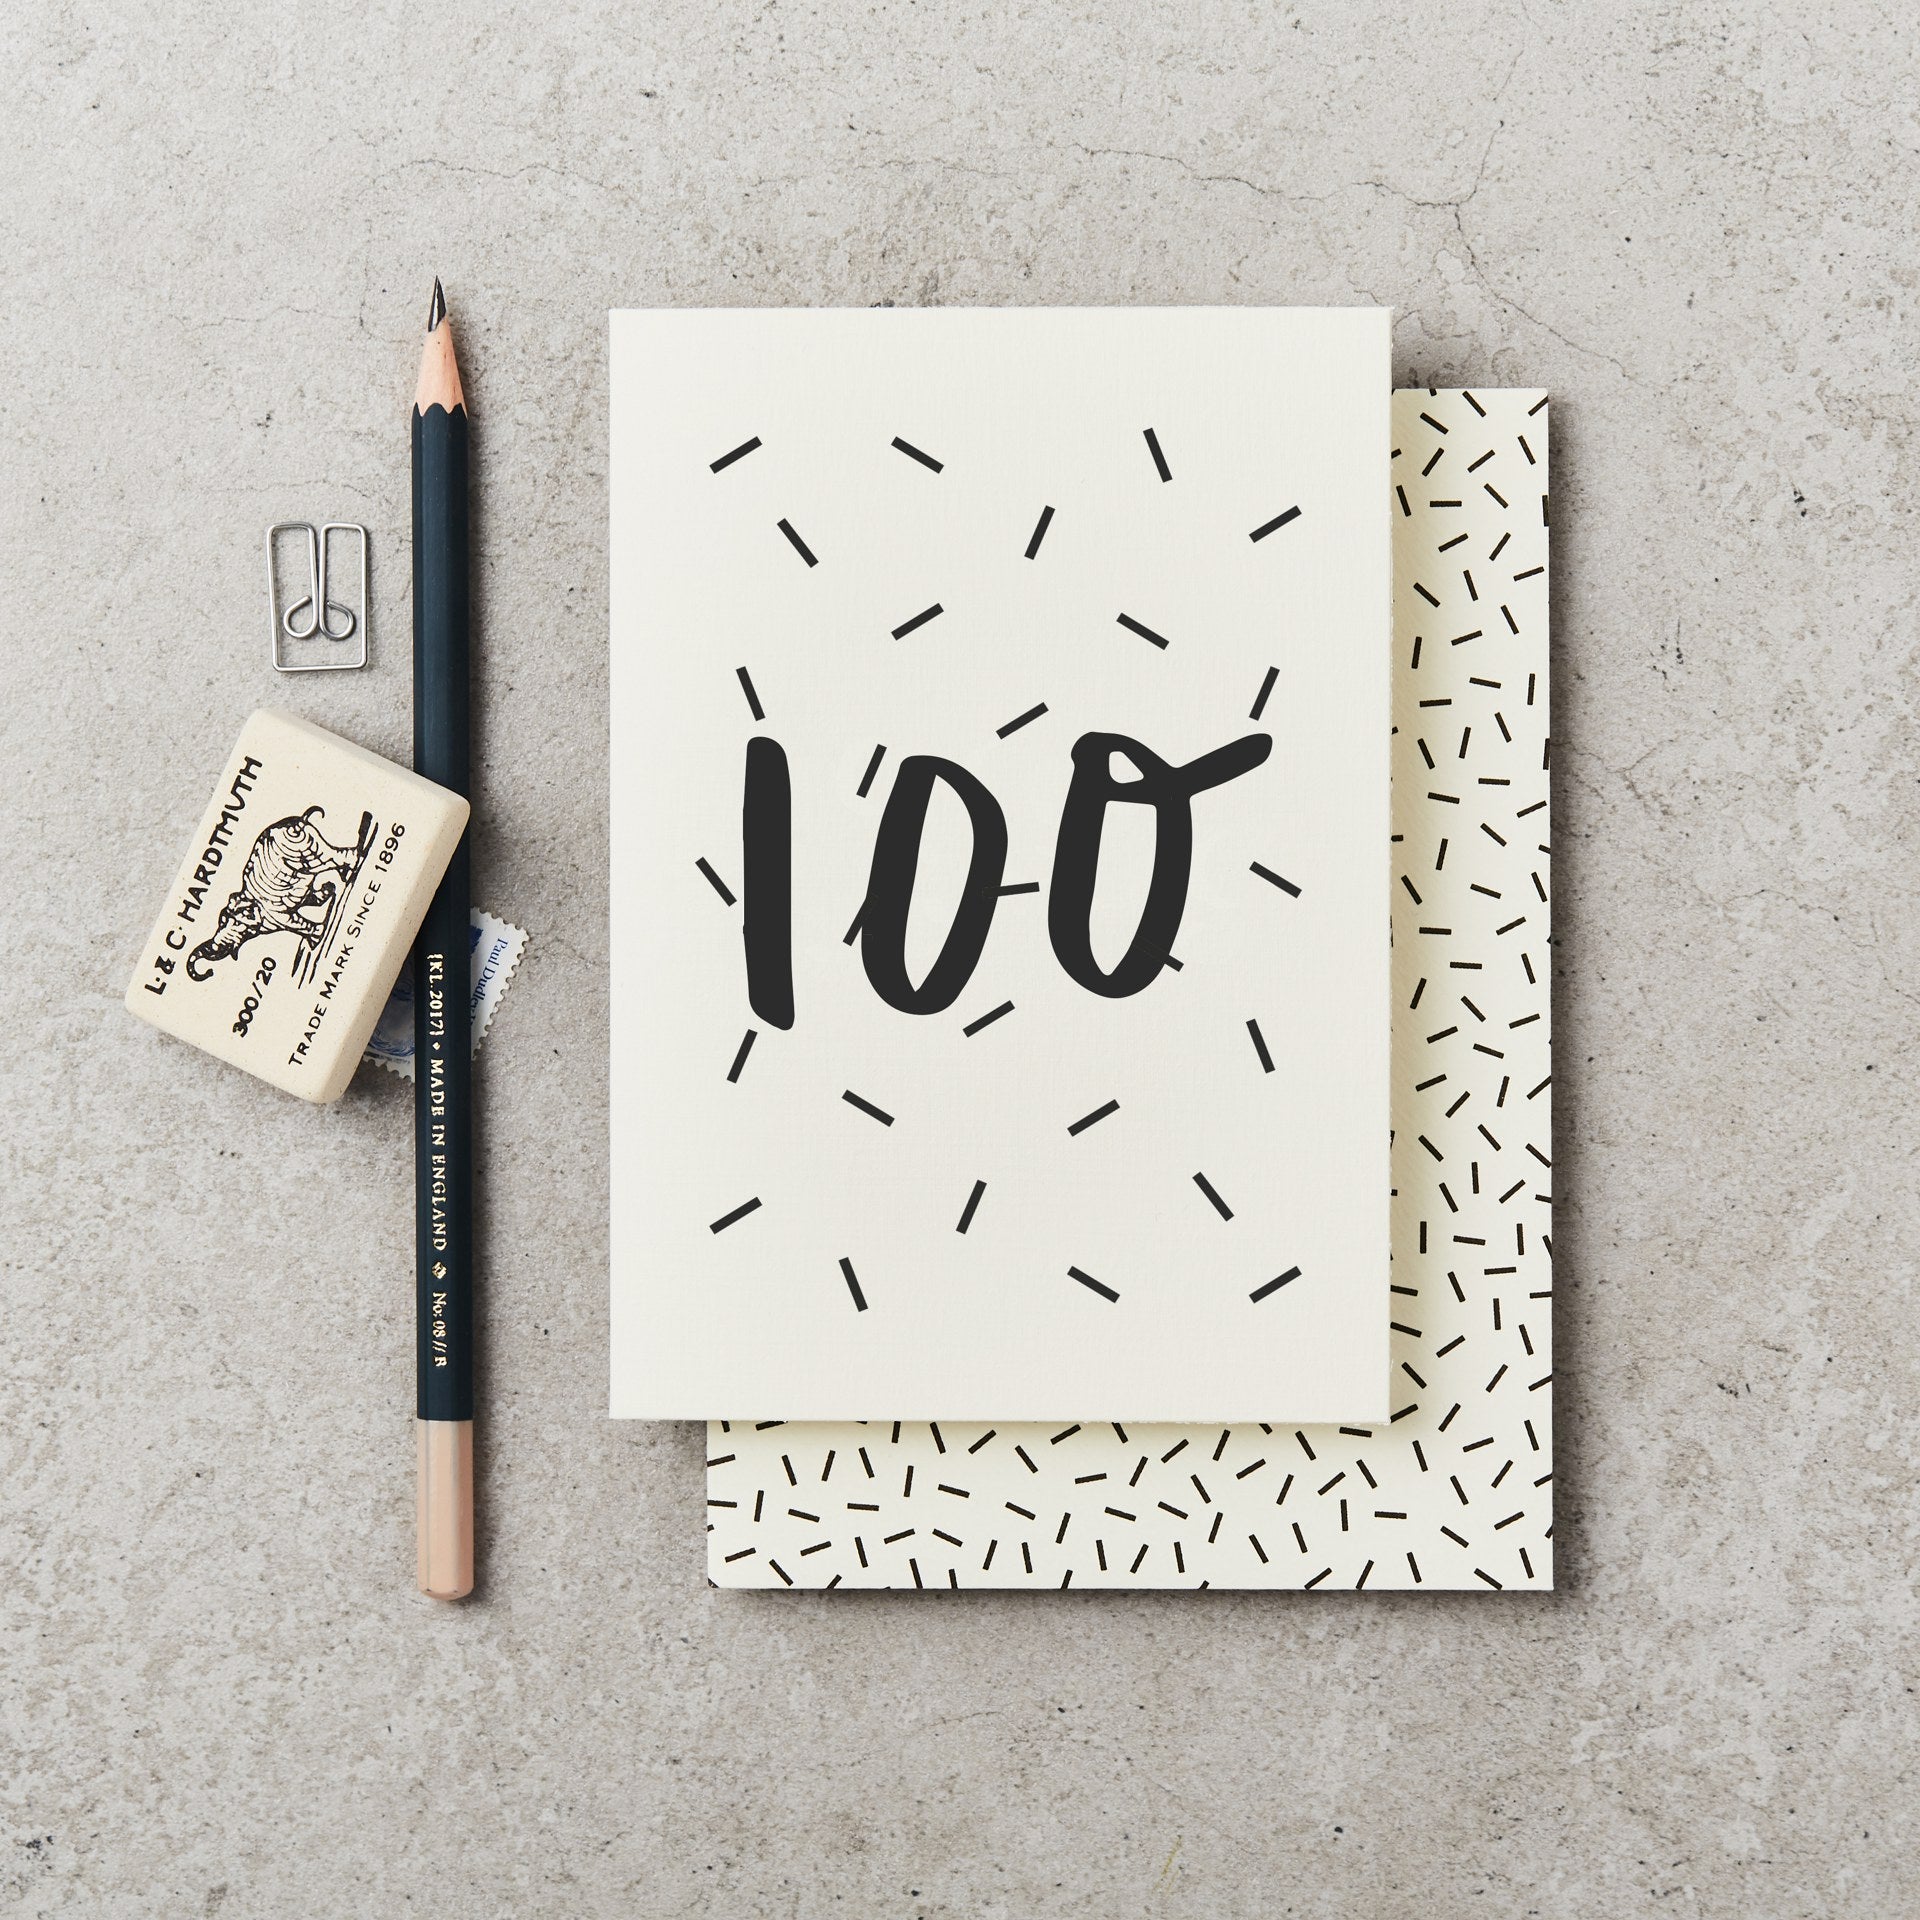 100 | CARD BY KATIE LEAMON